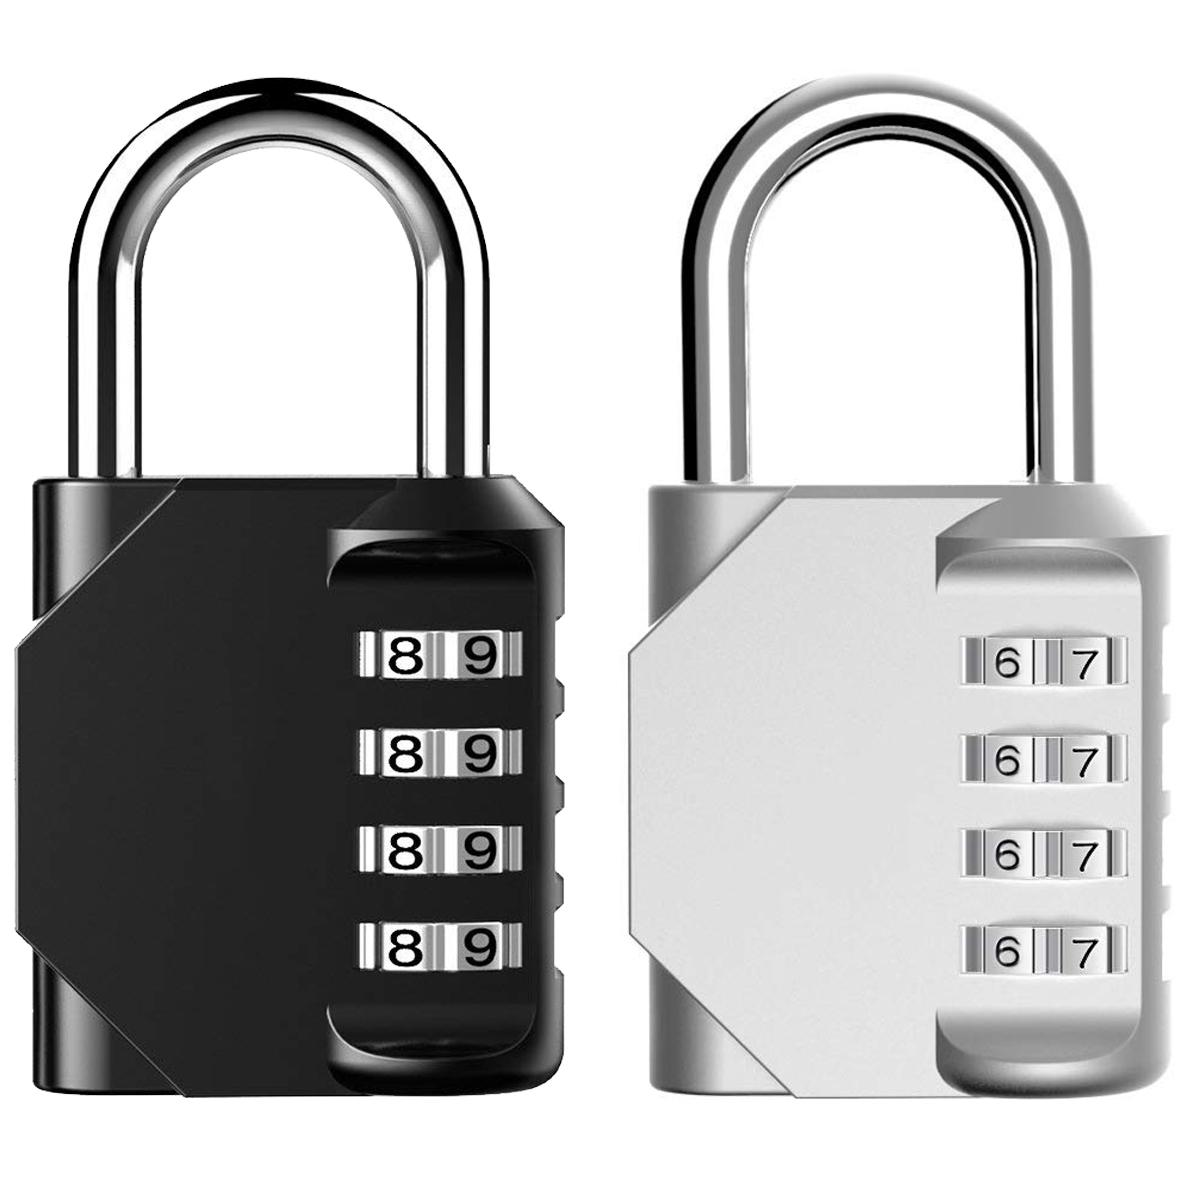 School and Employee Locker Combination Lock of 4 Digit 10000 Combinations for Outdoor or Indoor Gym Fence-2 Packs Black Padlock 40 MM Sports 